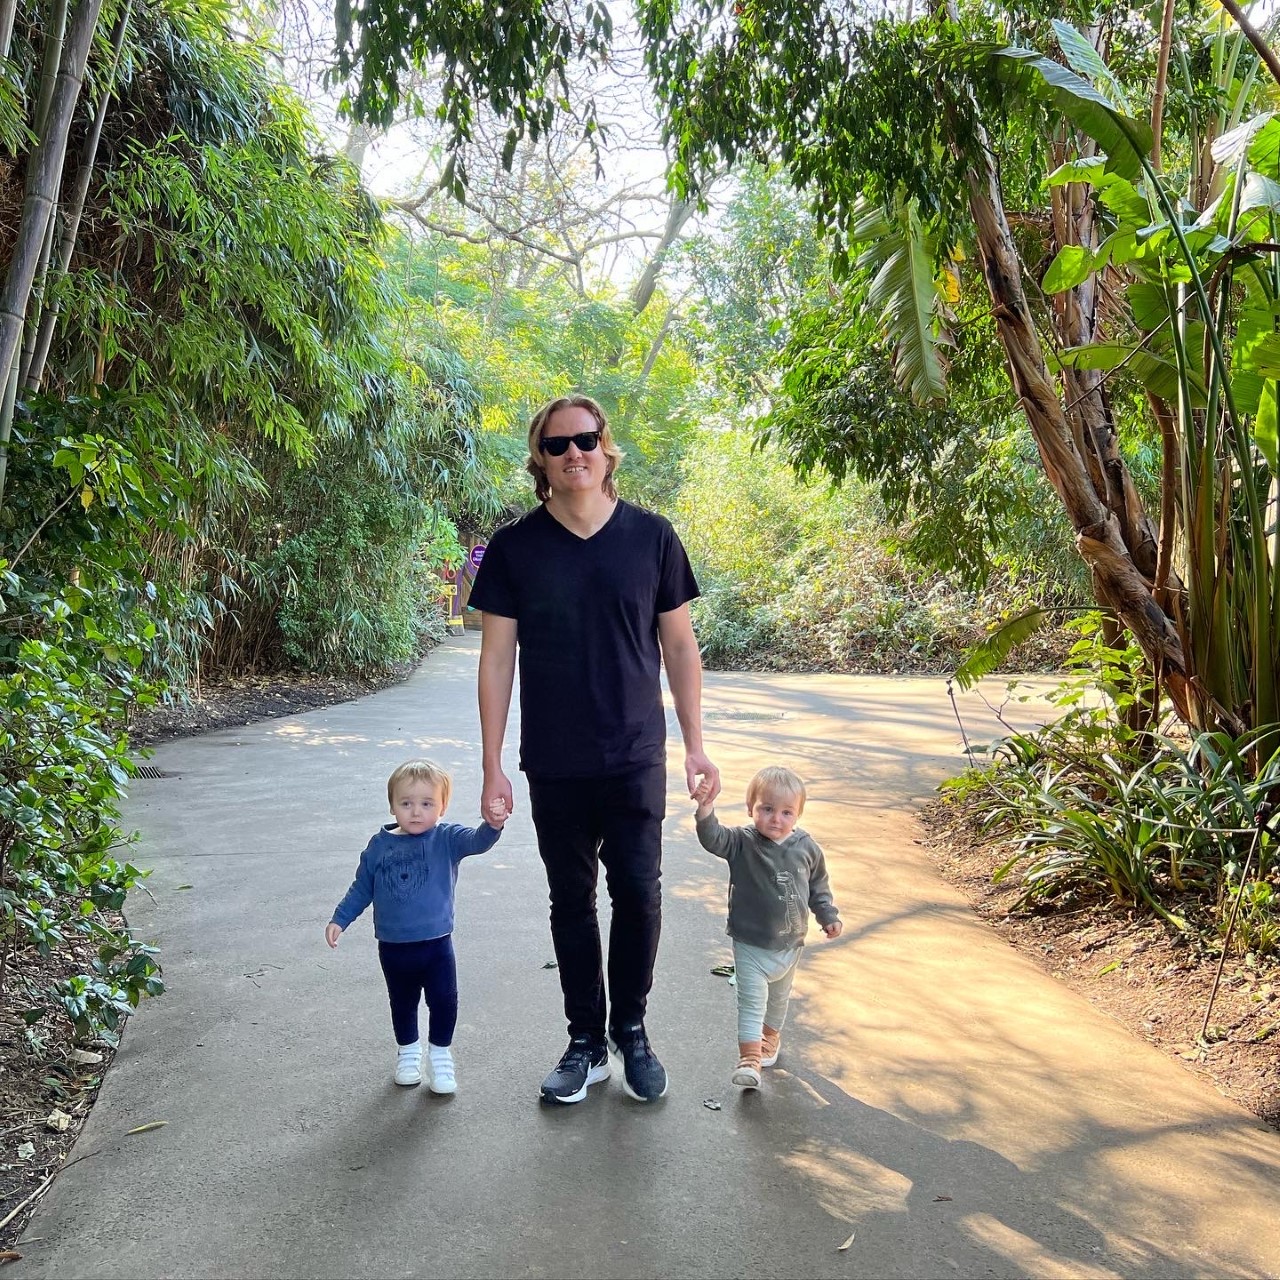 isaac walking along a path holding the hands of his twin toddler boys